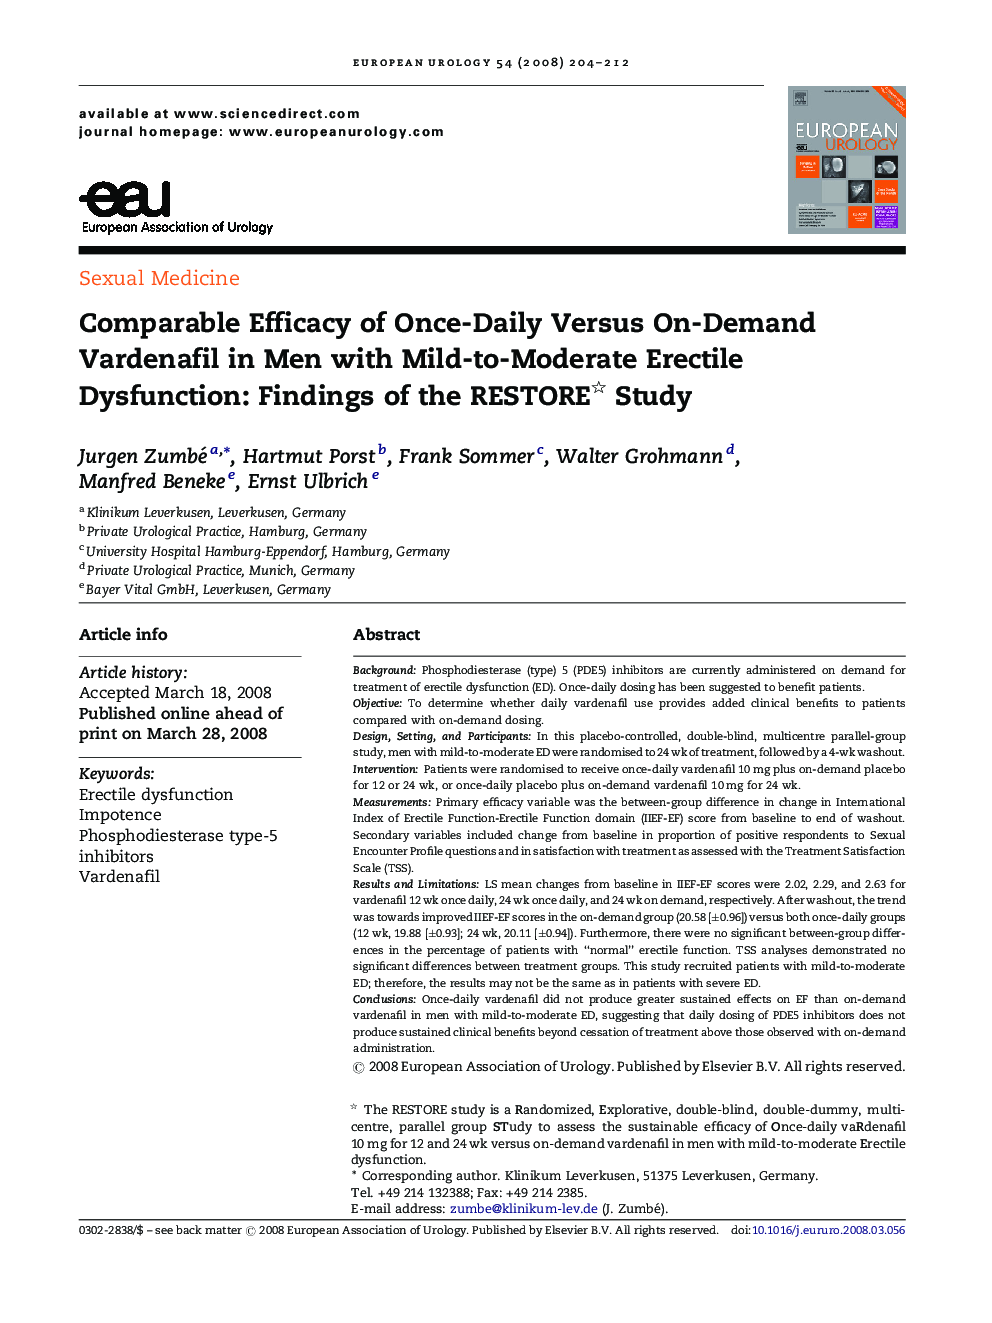 Comparable Efficacy of Once-Daily Versus On-Demand Vardenafil in Men with Mild-to-Moderate Erectile Dysfunction: Findings of the RESTORE Study 